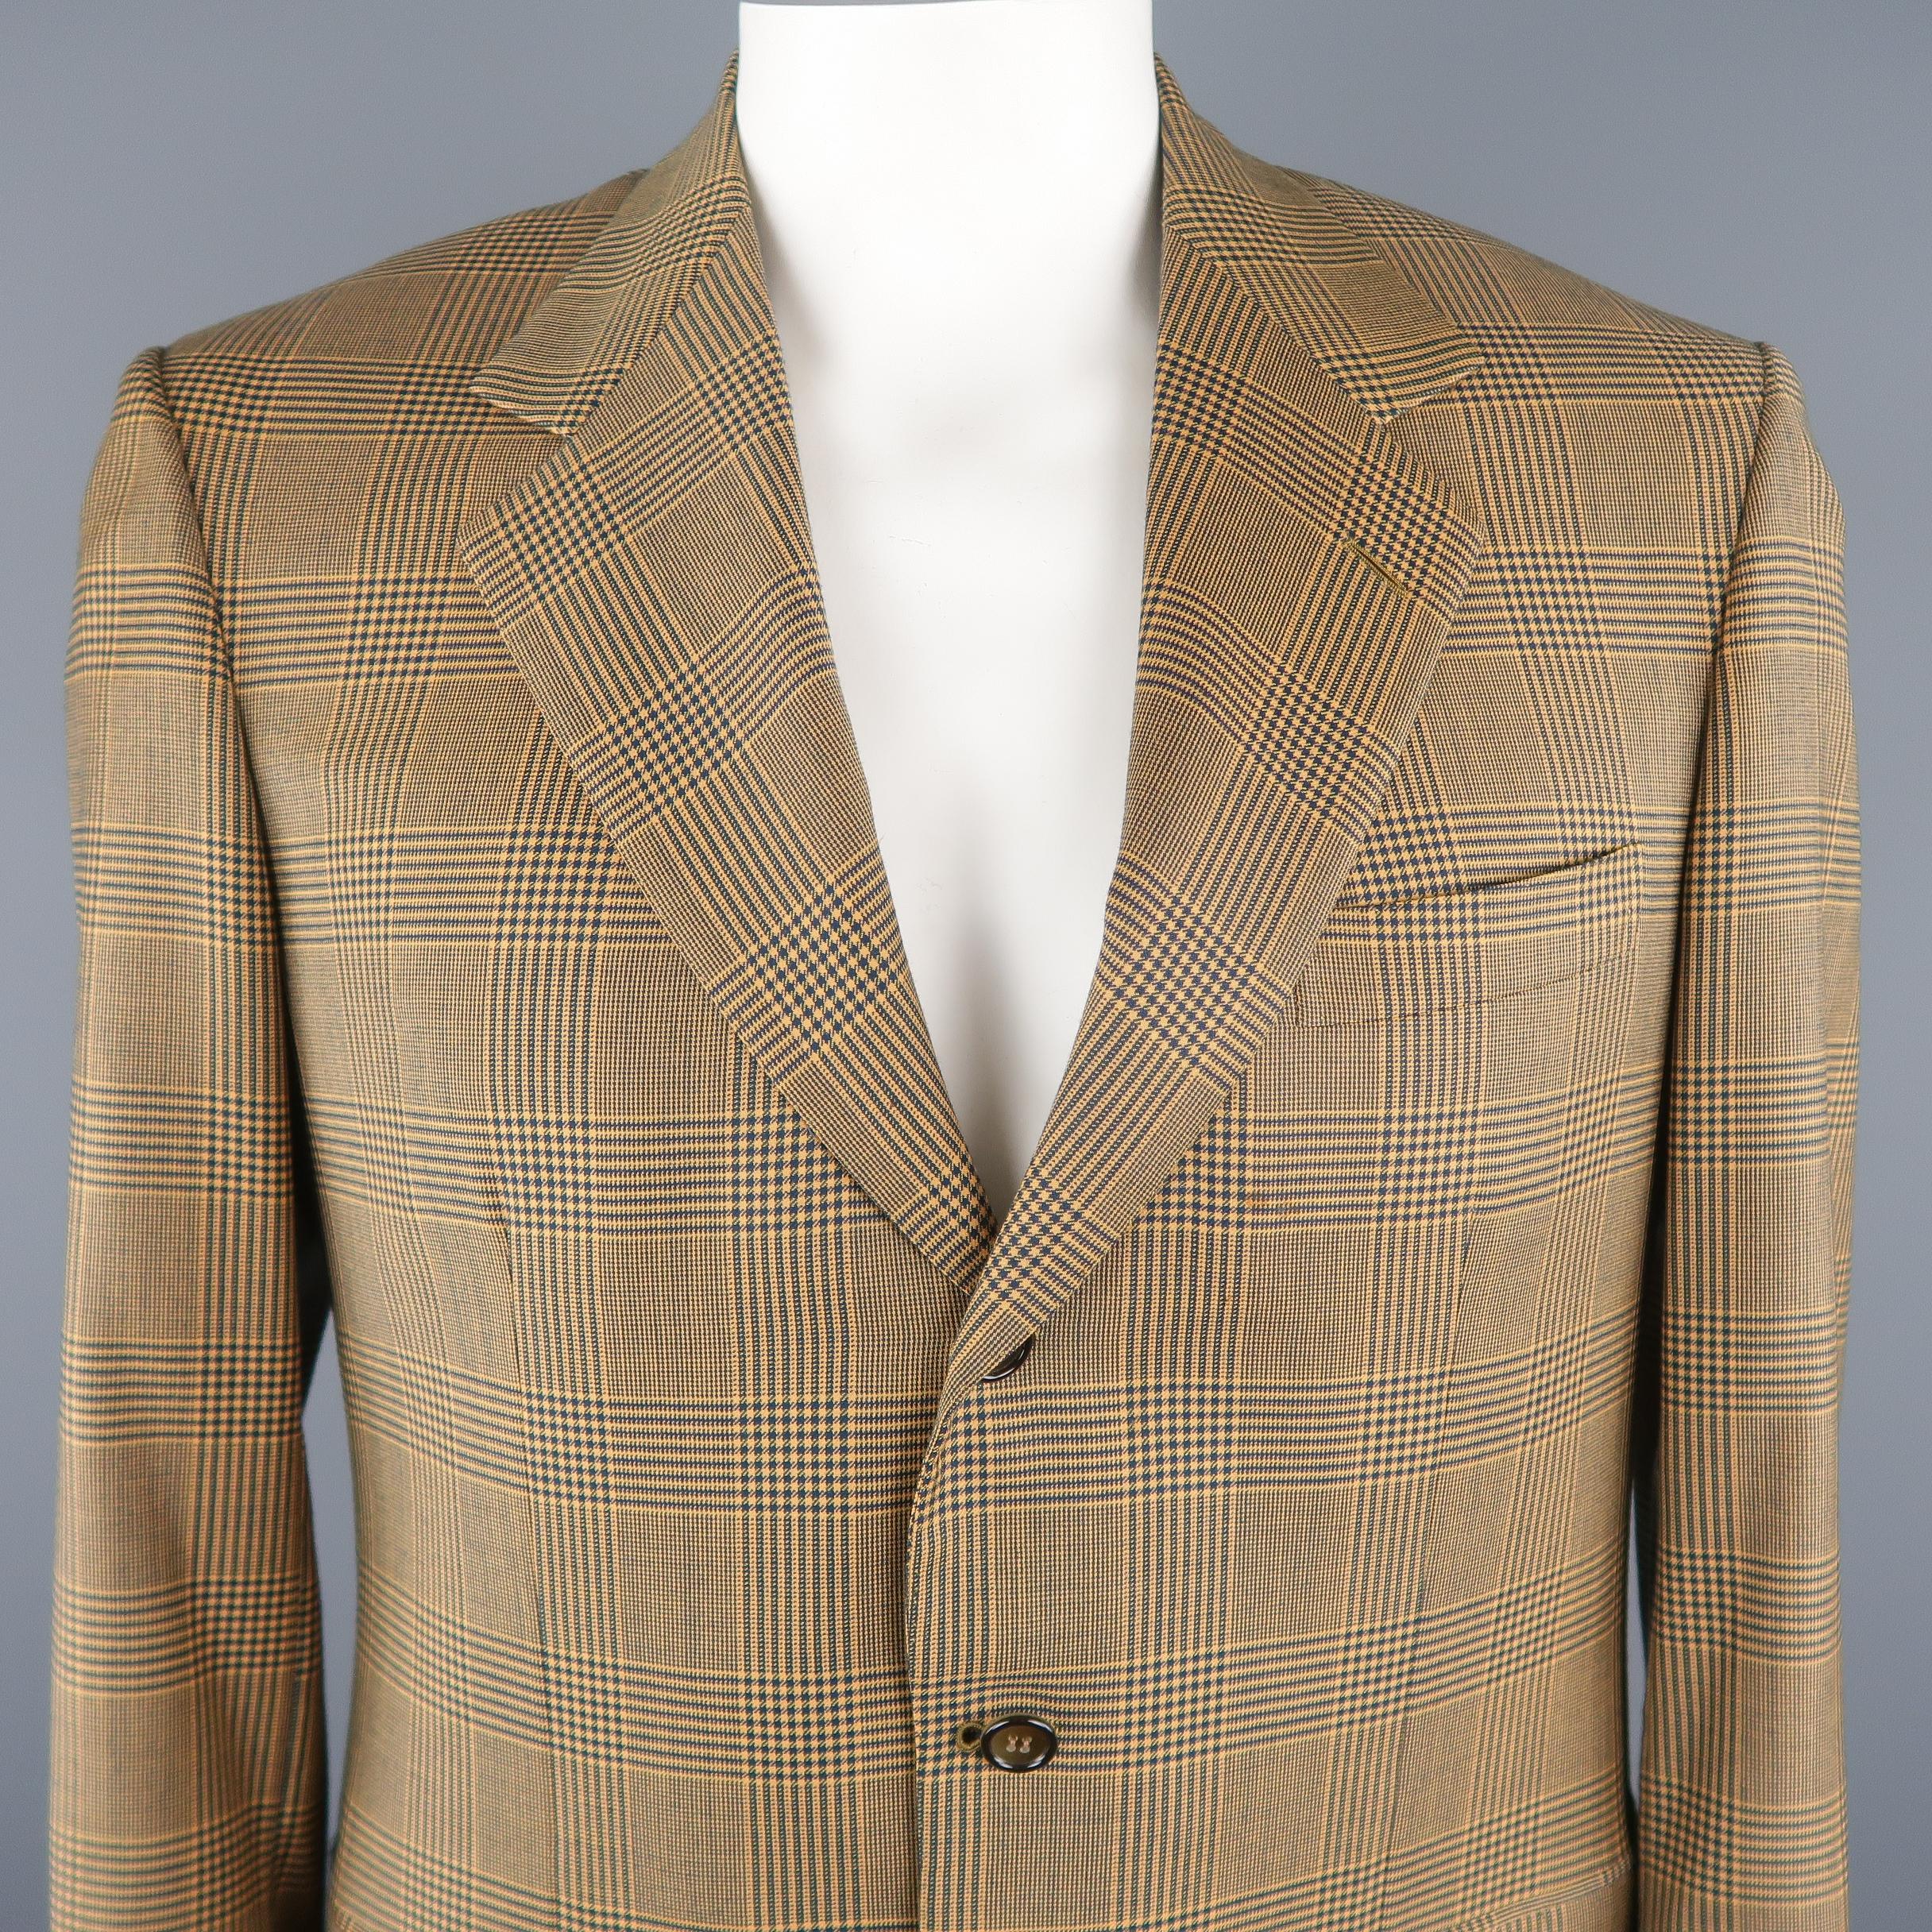 BRIONI blazer comes in gold and navy tones in a plaid wool material, featuring a notch lapel, slit and flap pockets, 3 buttons closure, single breasted. Presenting a light spot at front.  Made in Italy.
 
Excellent Pre-Owned Condition.
Marked: 50